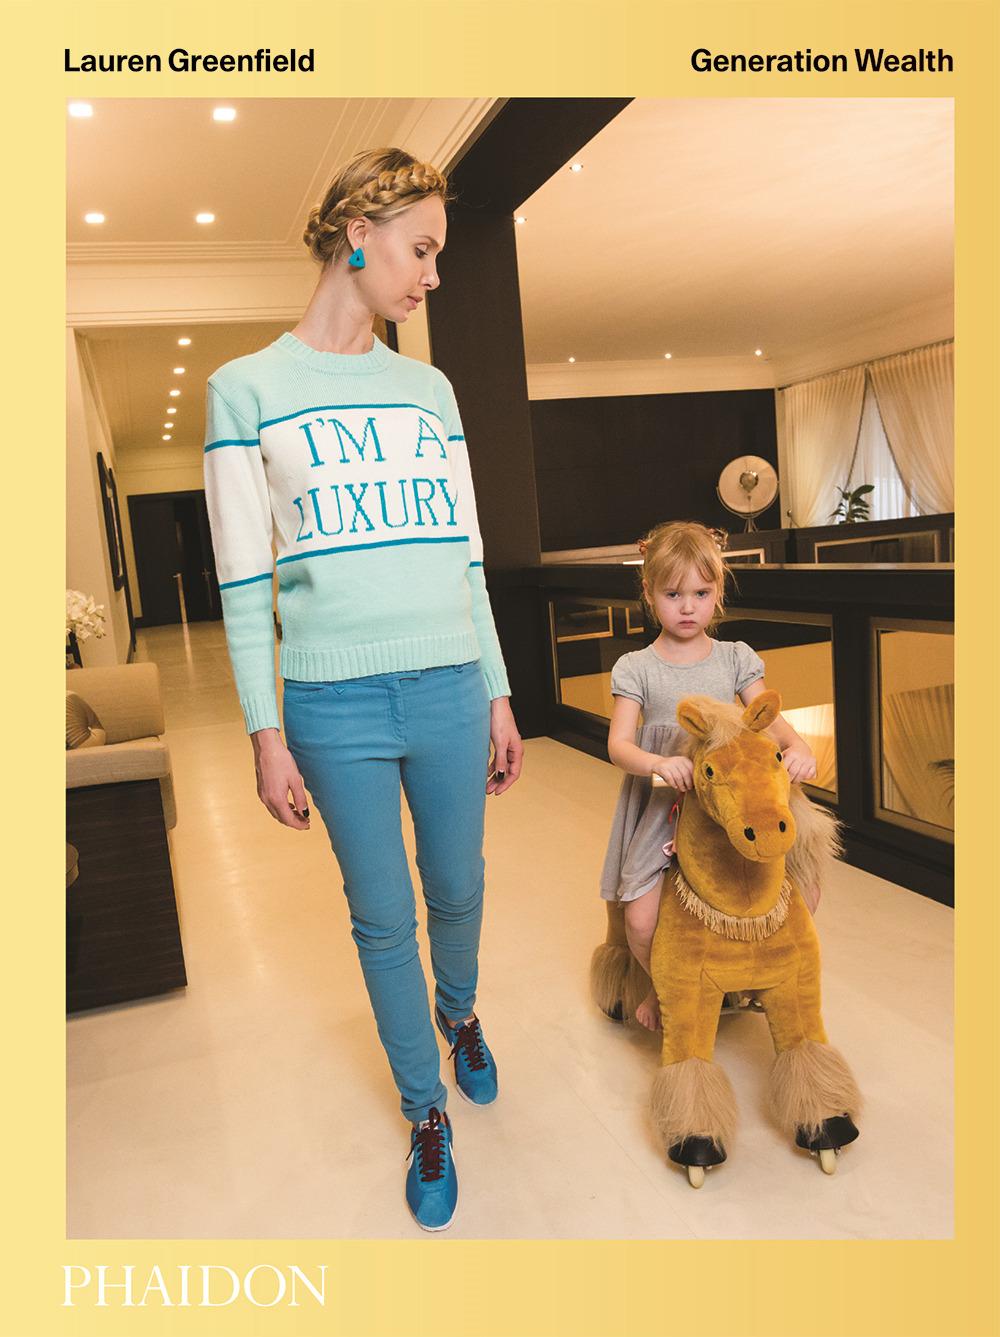 Paper Lauren Greenfield: Generation Wealth Photography Book For Sale